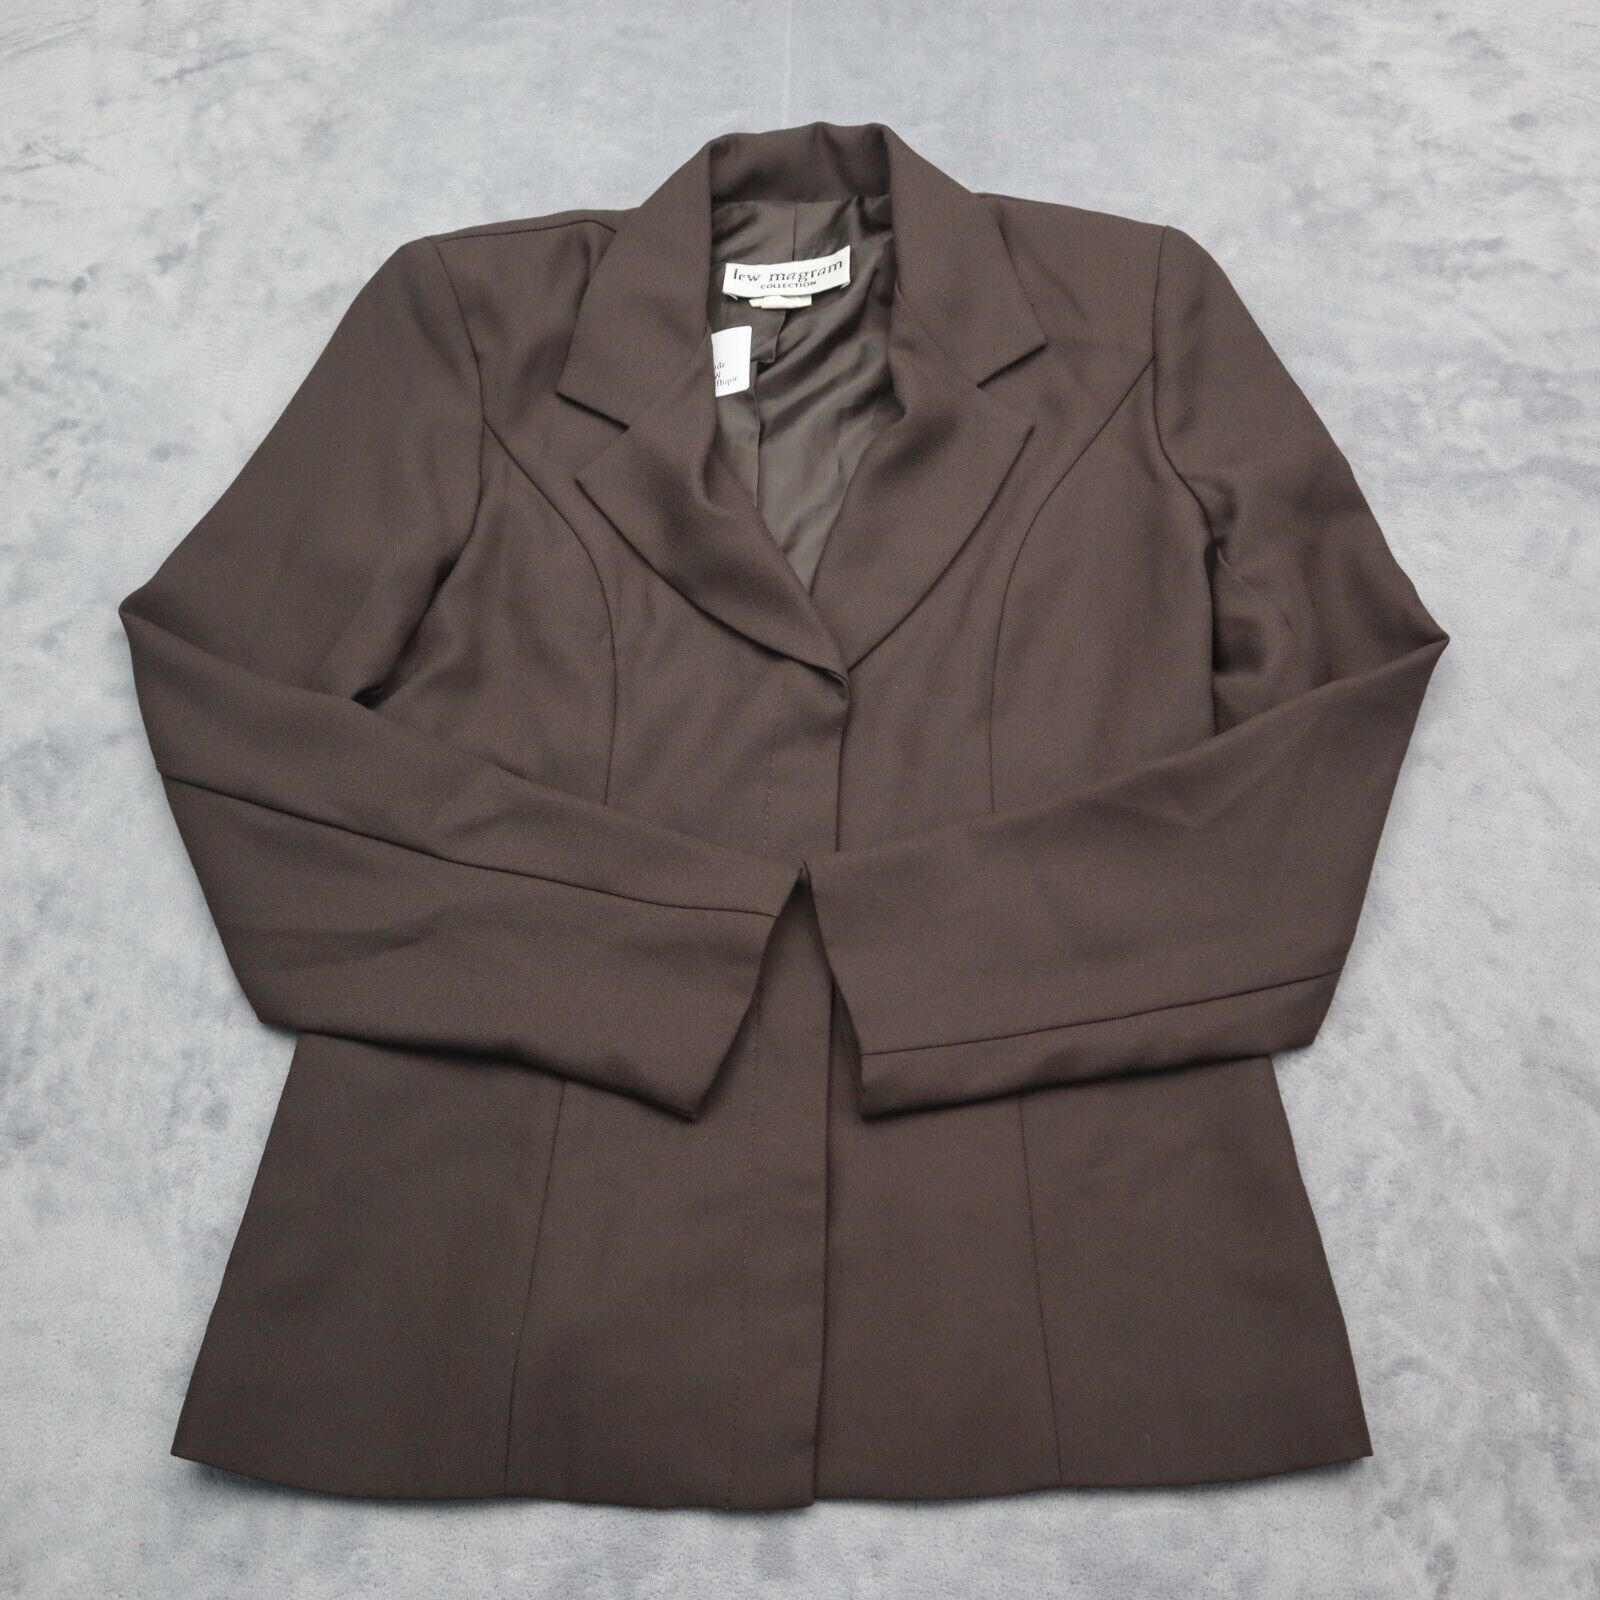 Primary image for Lew Magram Suit Womens 4 Brown Long Sleeve Notch Lapel Open Front Jacket